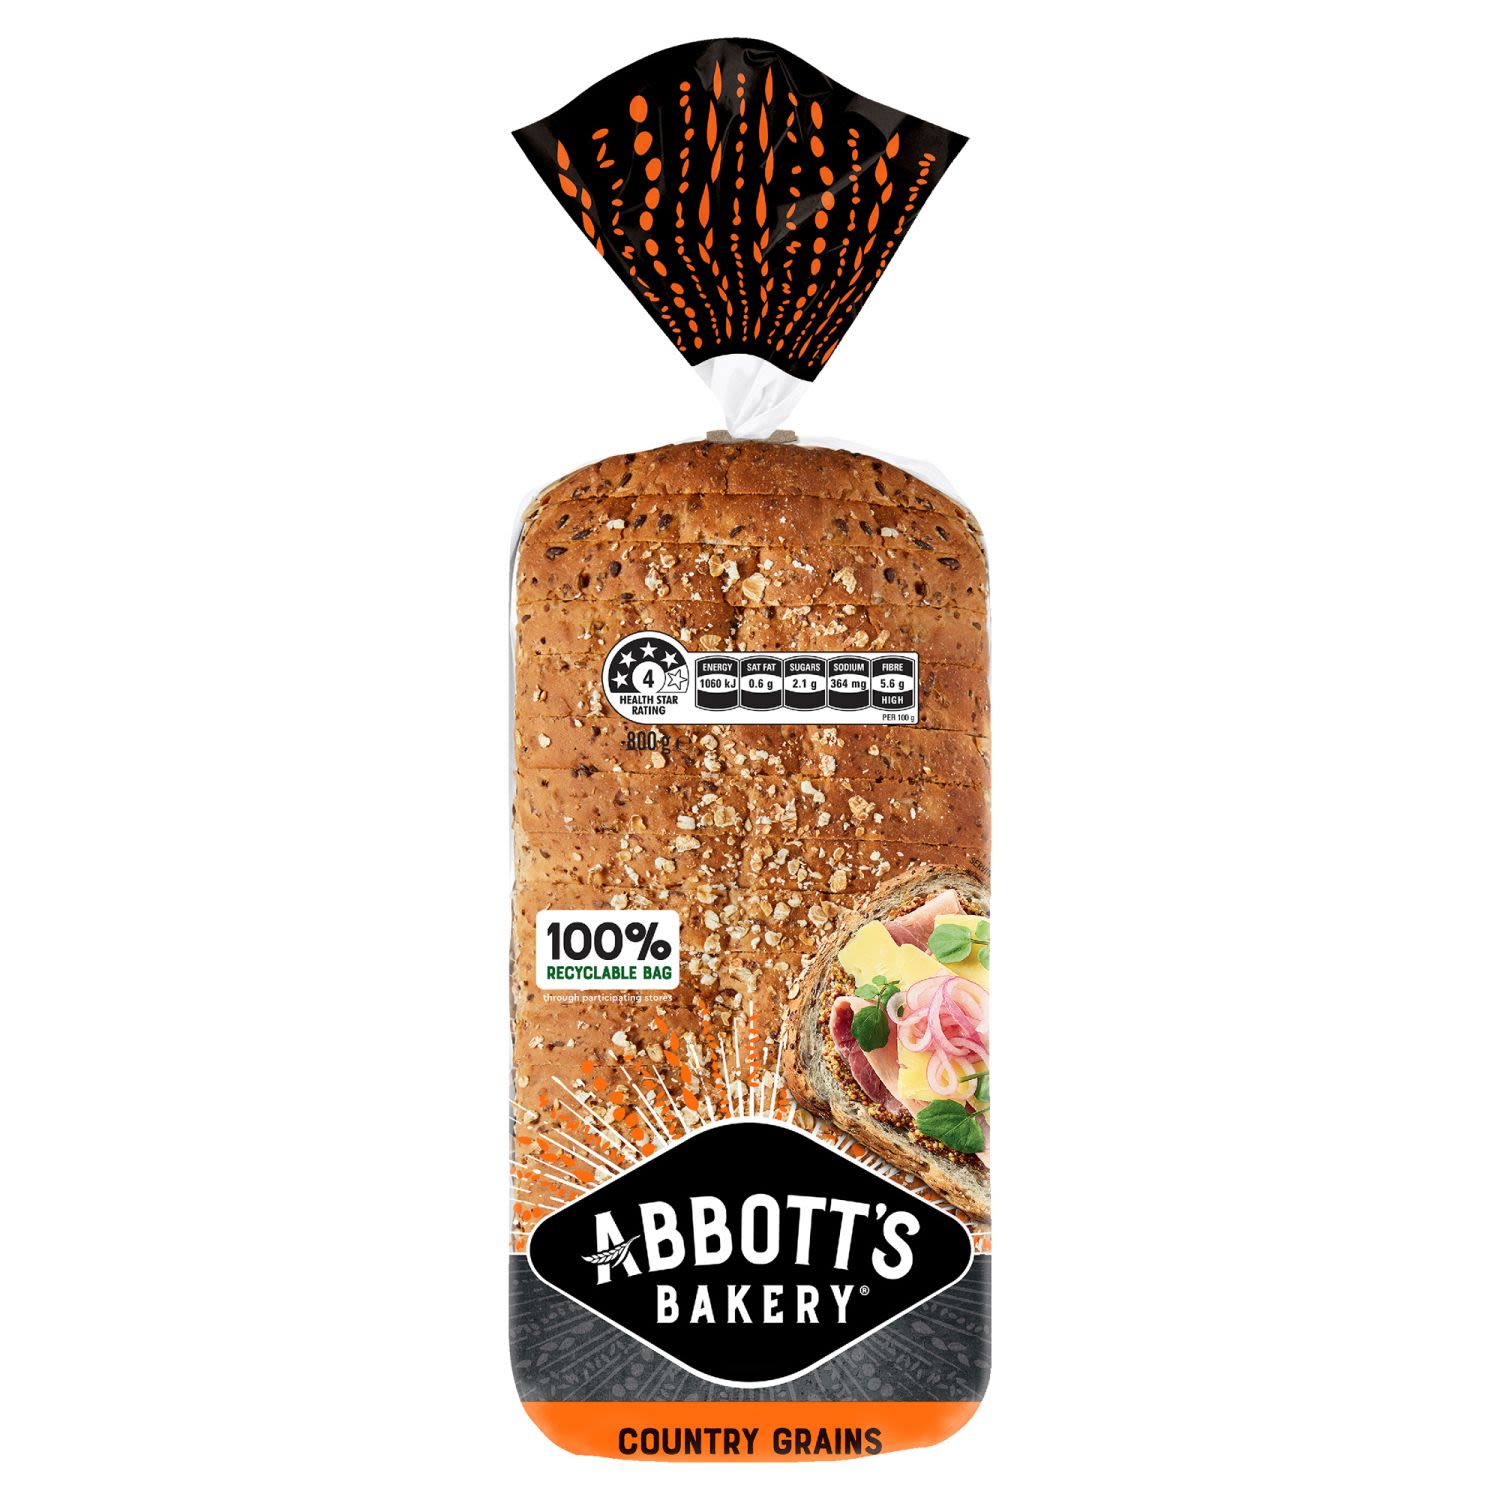 Abbott's Bakery creations are crafted to be so full of flavour, texture and aroma that they are absolutely, positively irresistable. Now its over to you. Work your topping magic, and savour every last crumb.<br /> <br /><br />Allergen may be present: Gluten| Soy| Wheat <br /><br />Country of Origin: Australia